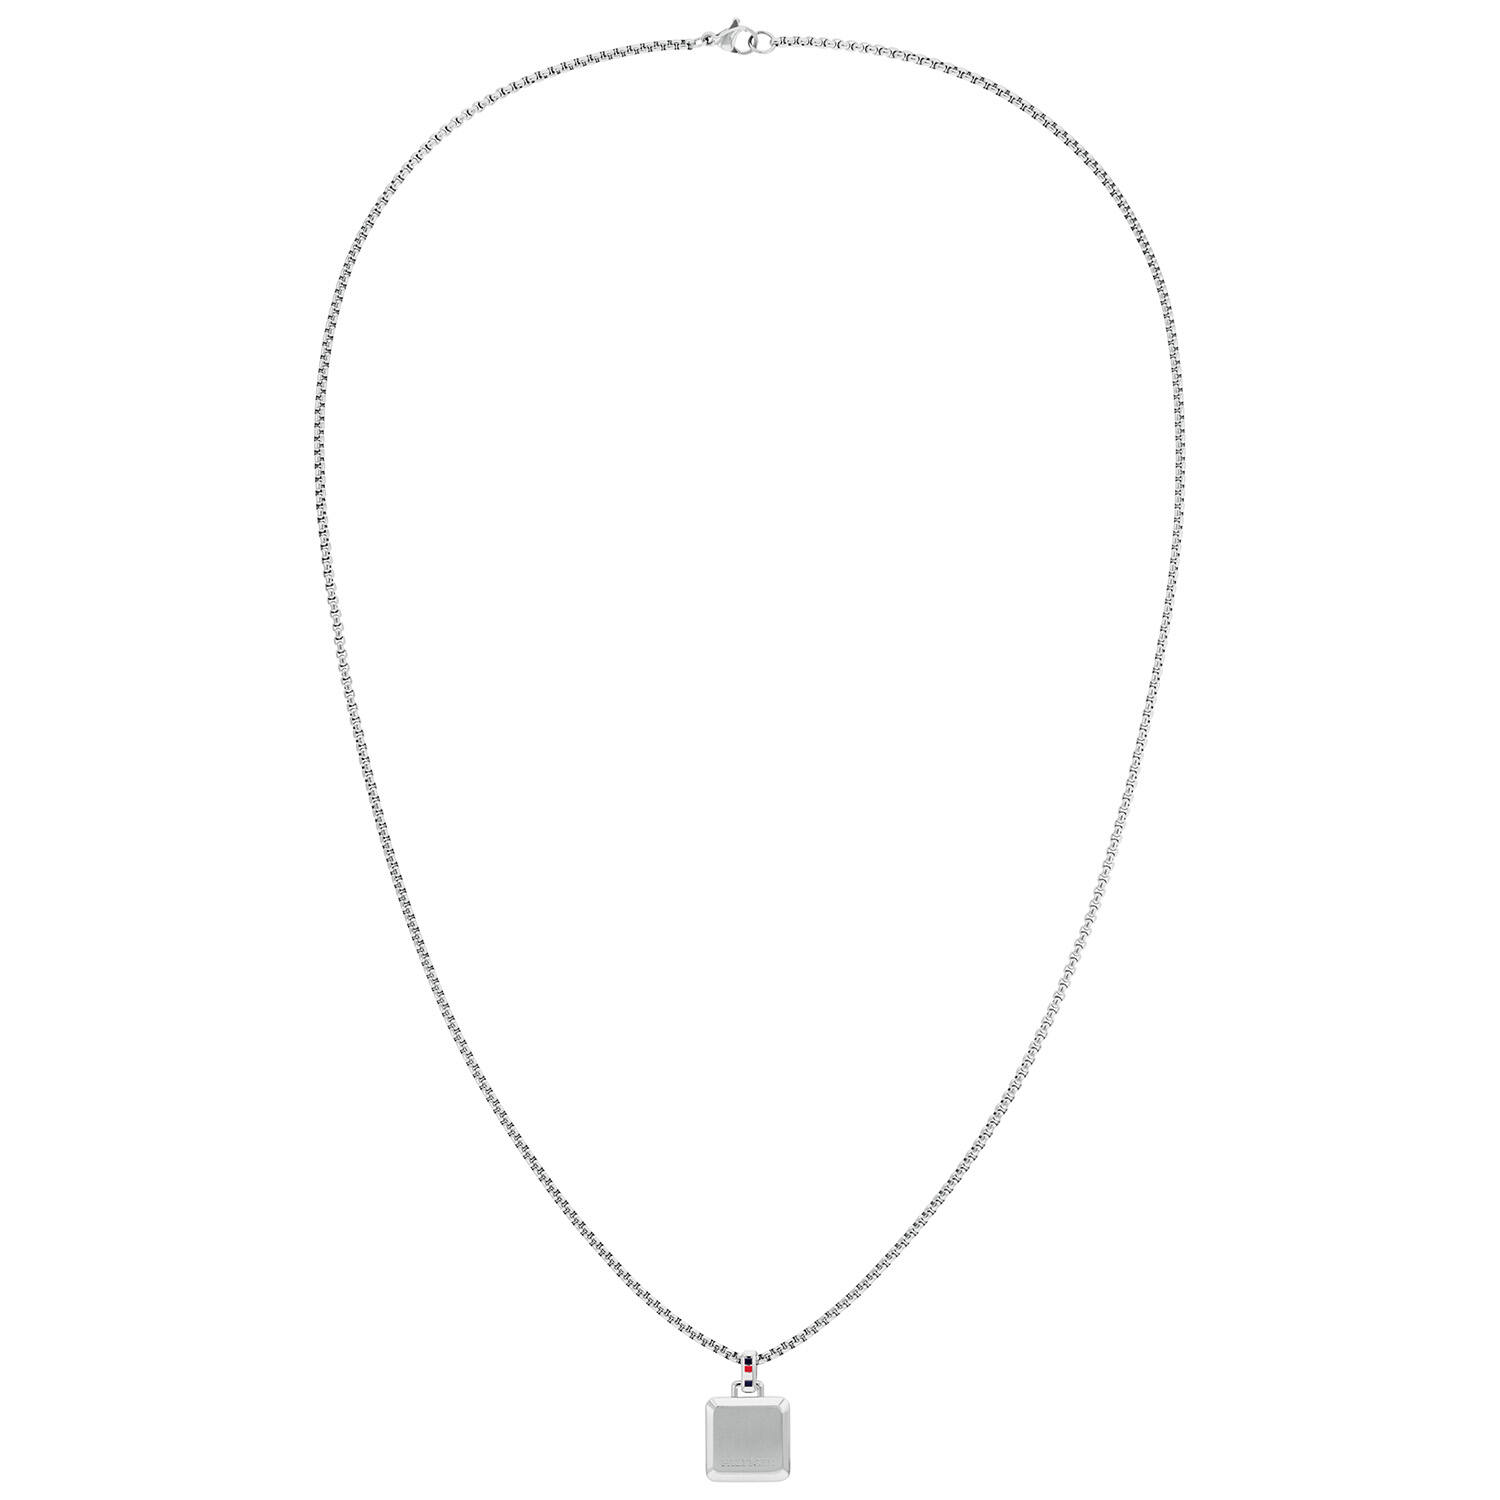  Collier - Staal - 60cm